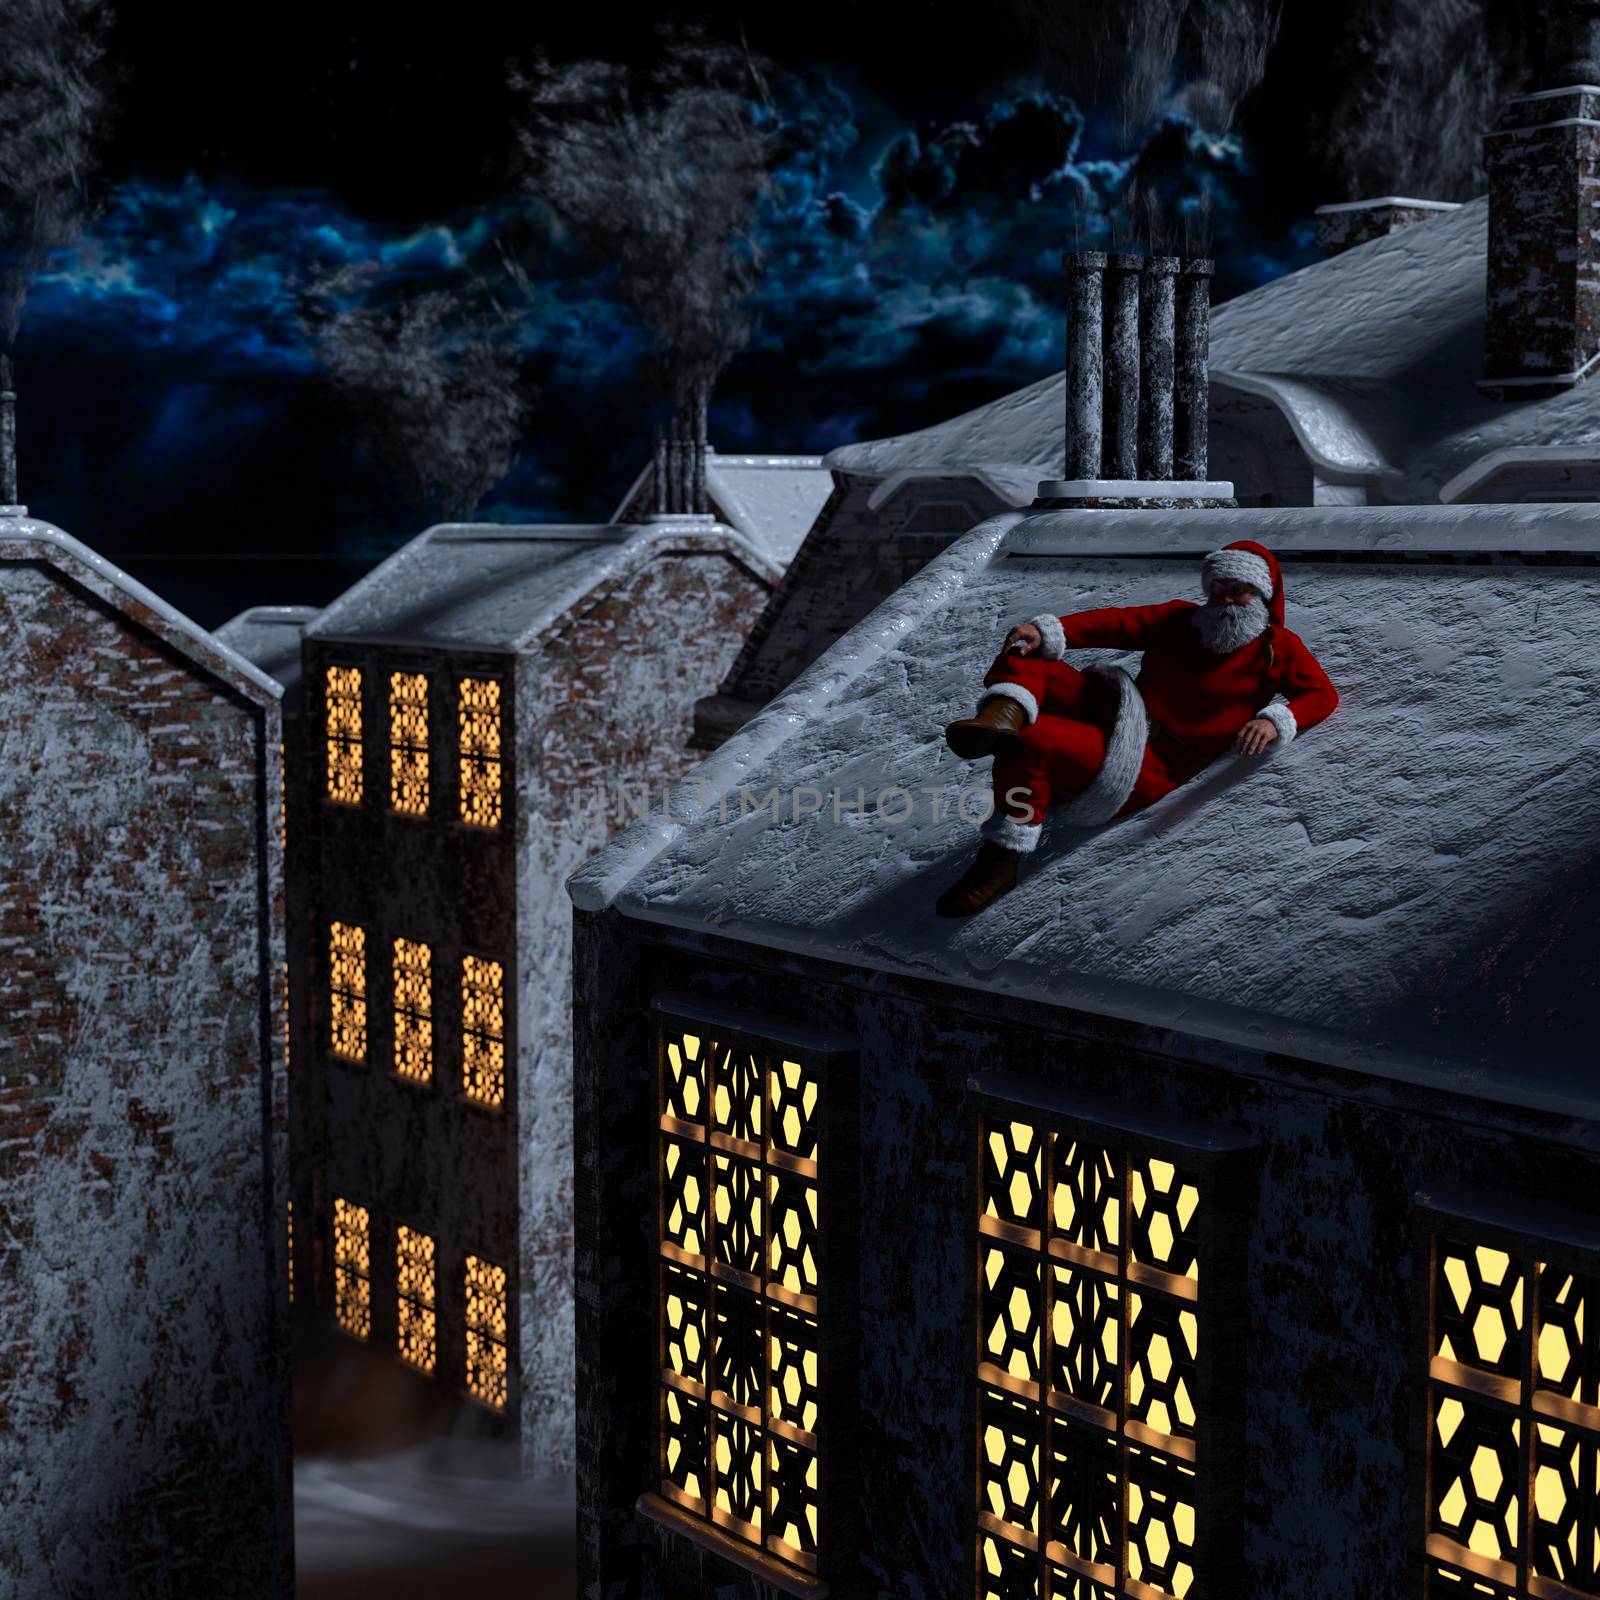 Santa Claus on the rooftop at the Christmas night by ankarb